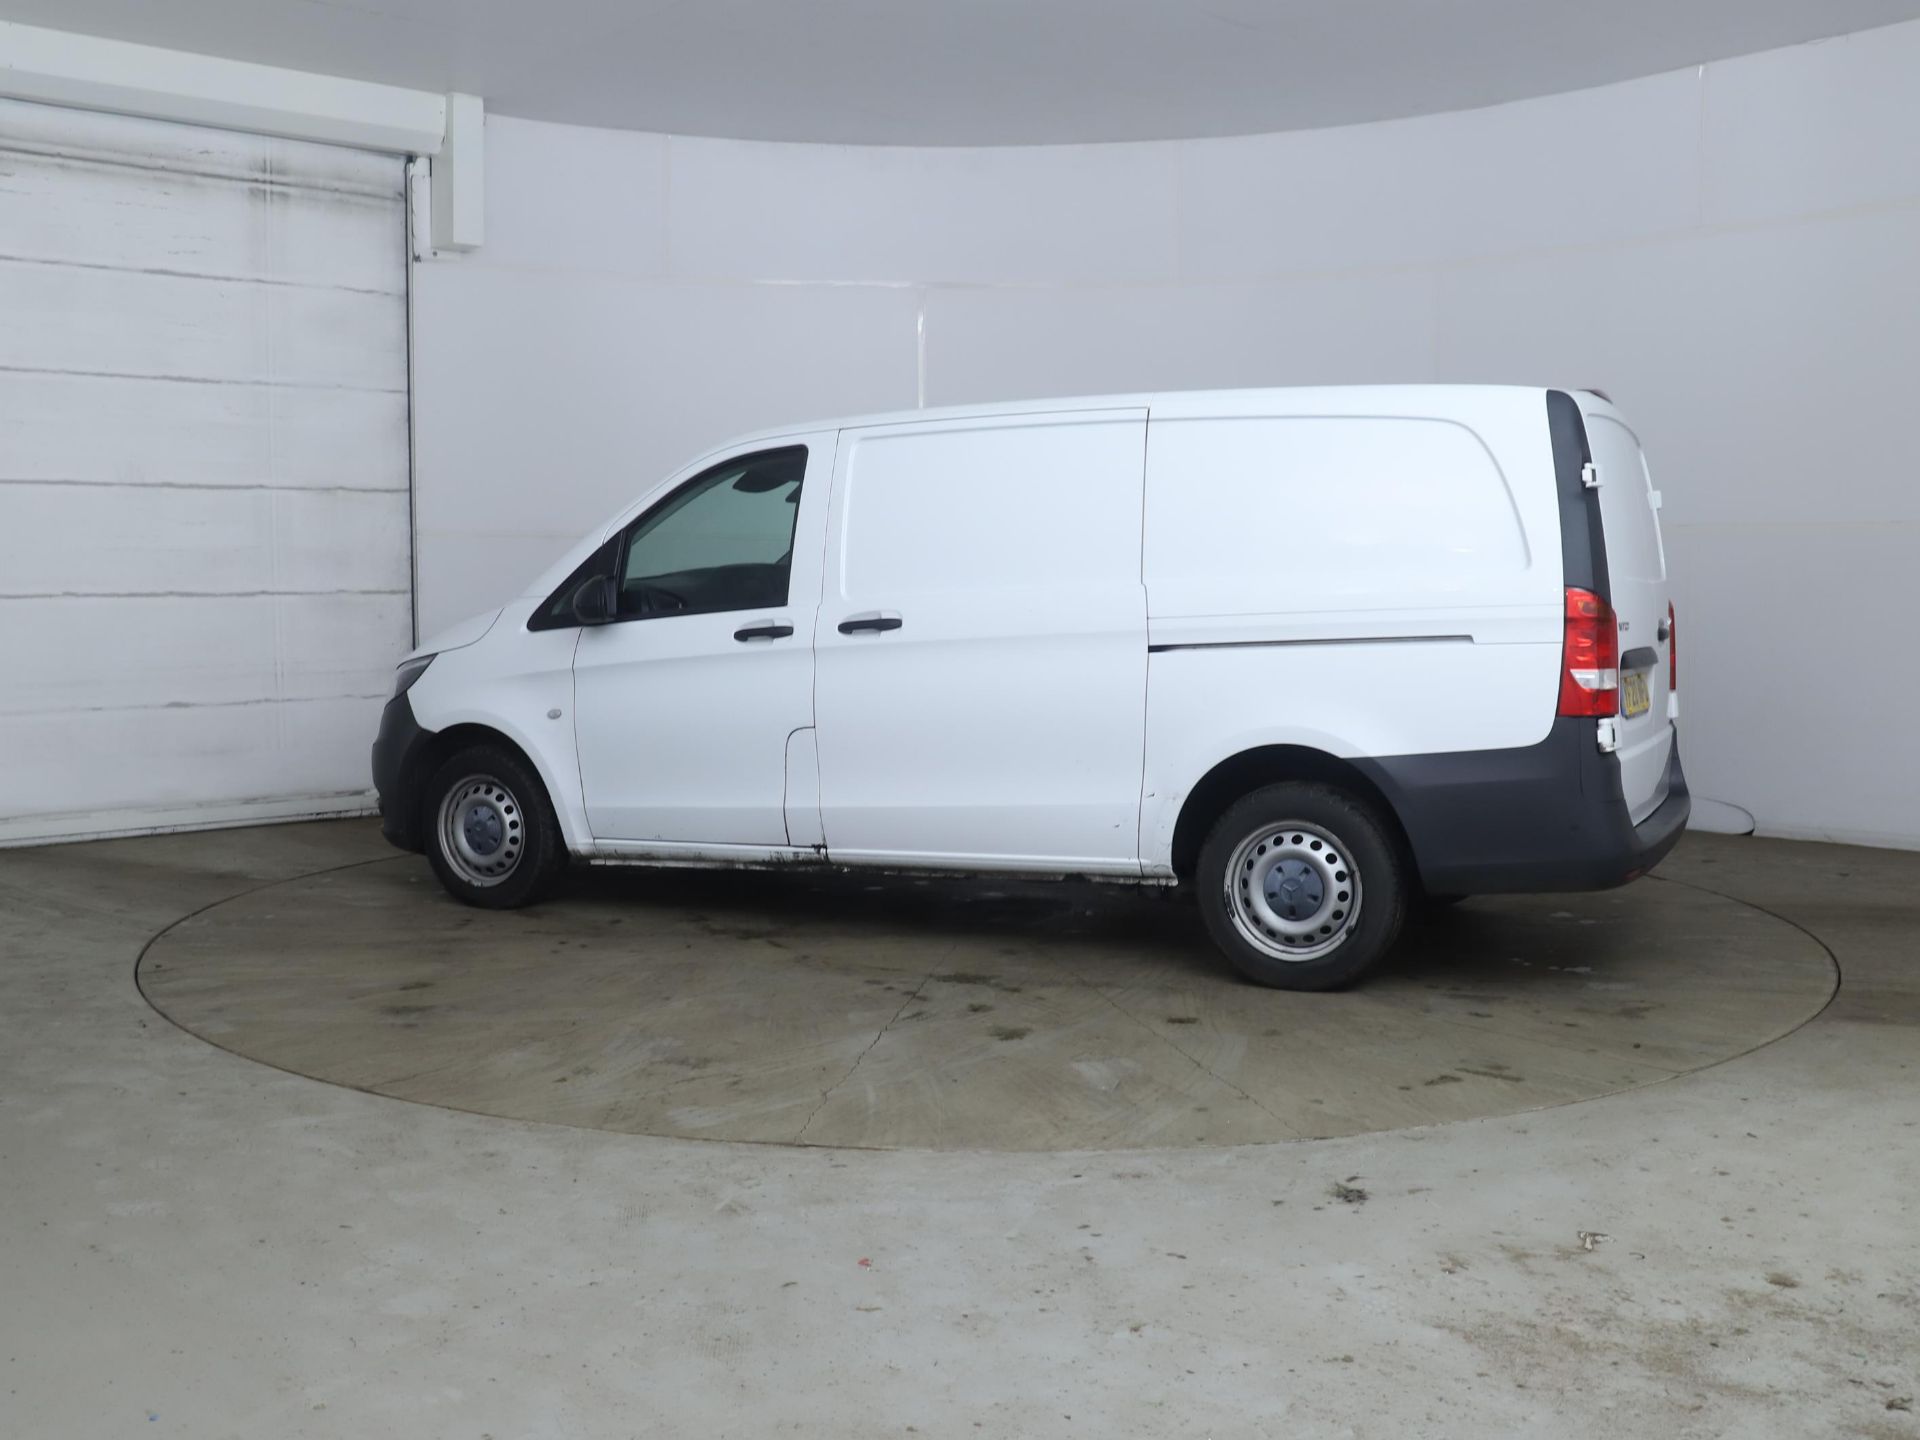 MERCEDES BENZ VITO CDI PURE - 2020 20 Reg - Only 74k Miles - 1 Owner From New - Parking Sensors - Image 2 of 12